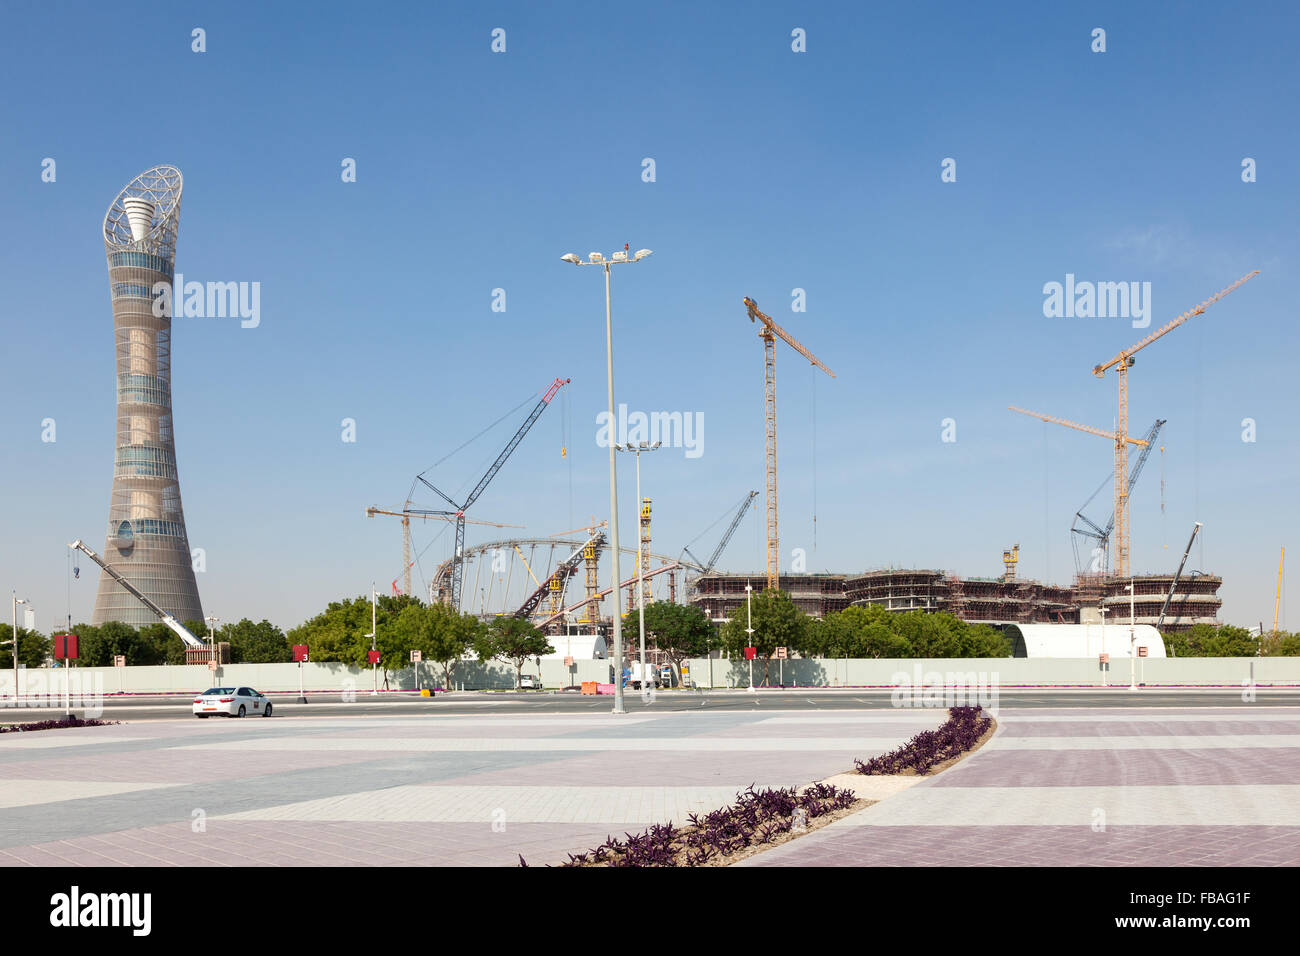 The Aspire tower and Khalifa Stadium under total renovation in Doha Stock Photo